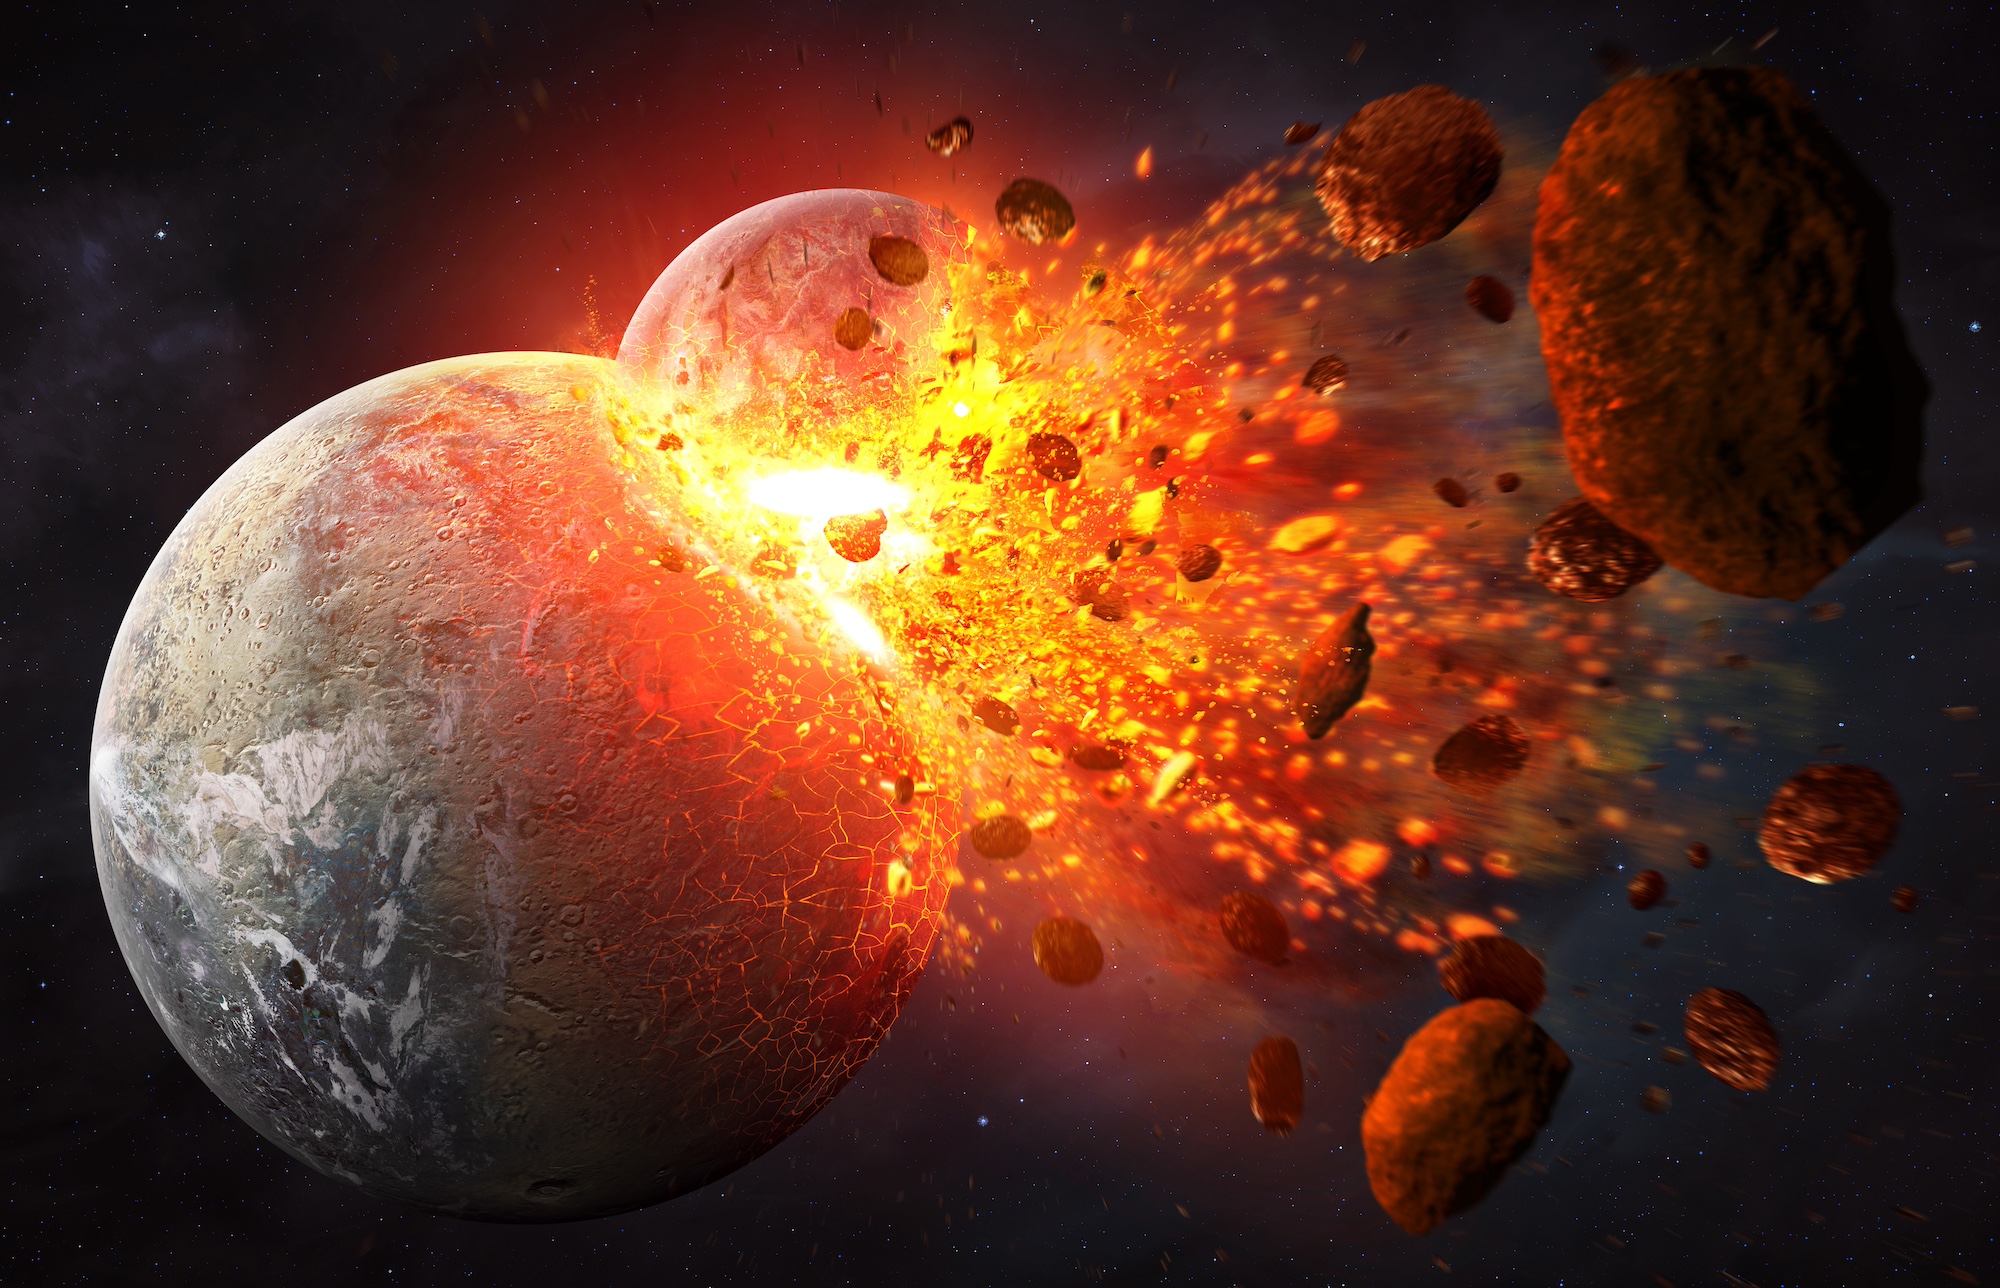 Illustration of the giant impact hypothesis, with the hypothetical planet Theia colliding with Earth 4.5 billion years ago, created on July 19, 2015. This impact is suggested to be the source of material that created the Moon. (Illustration by Tobias Roetsch/Future Publishing via Getty Images)